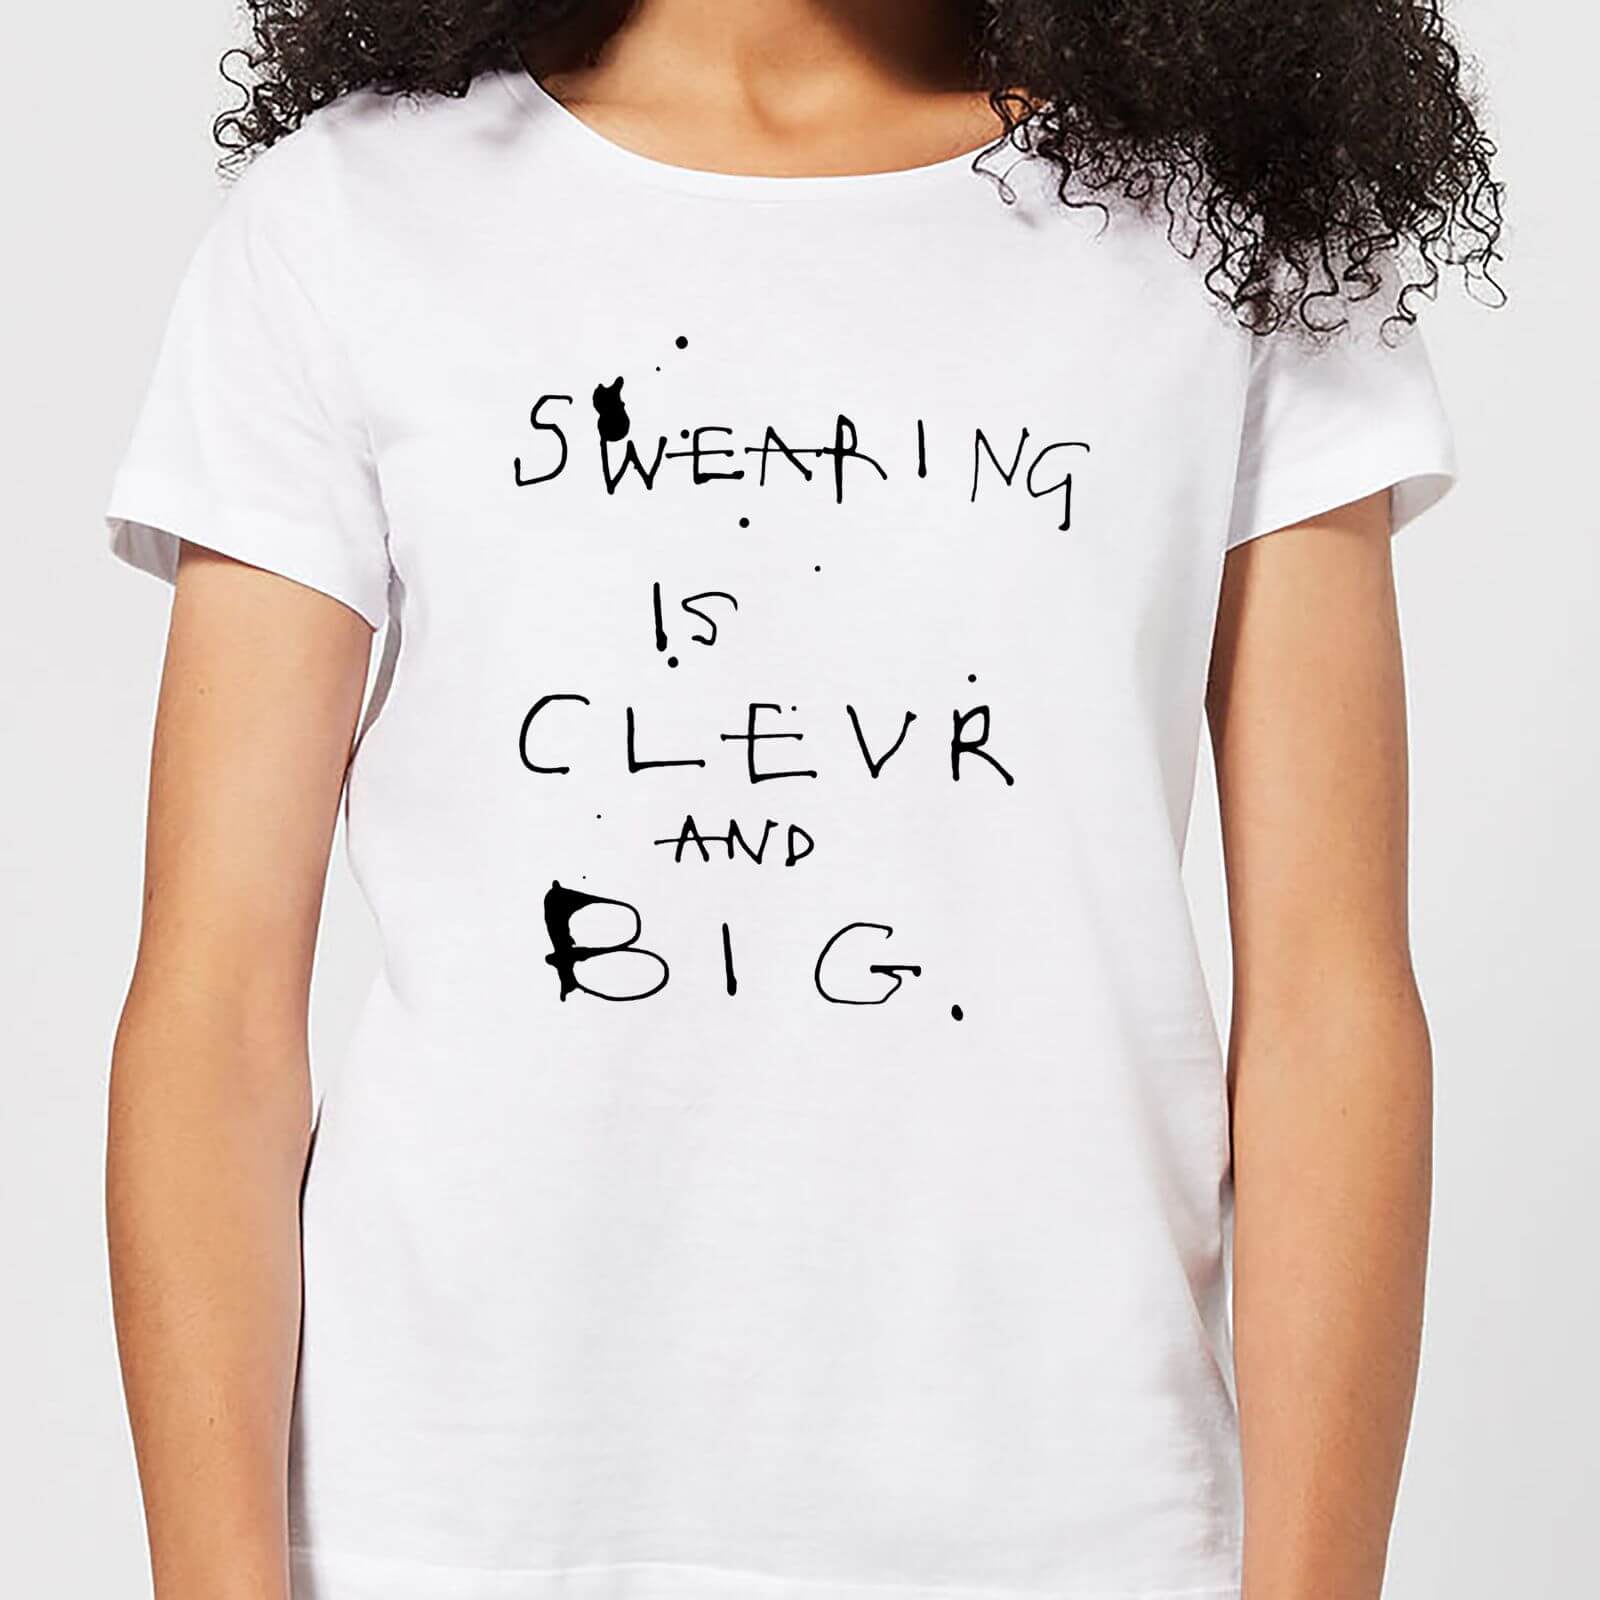 Poet and Painter Swearing Is Women's T-Shirt - White - S - White